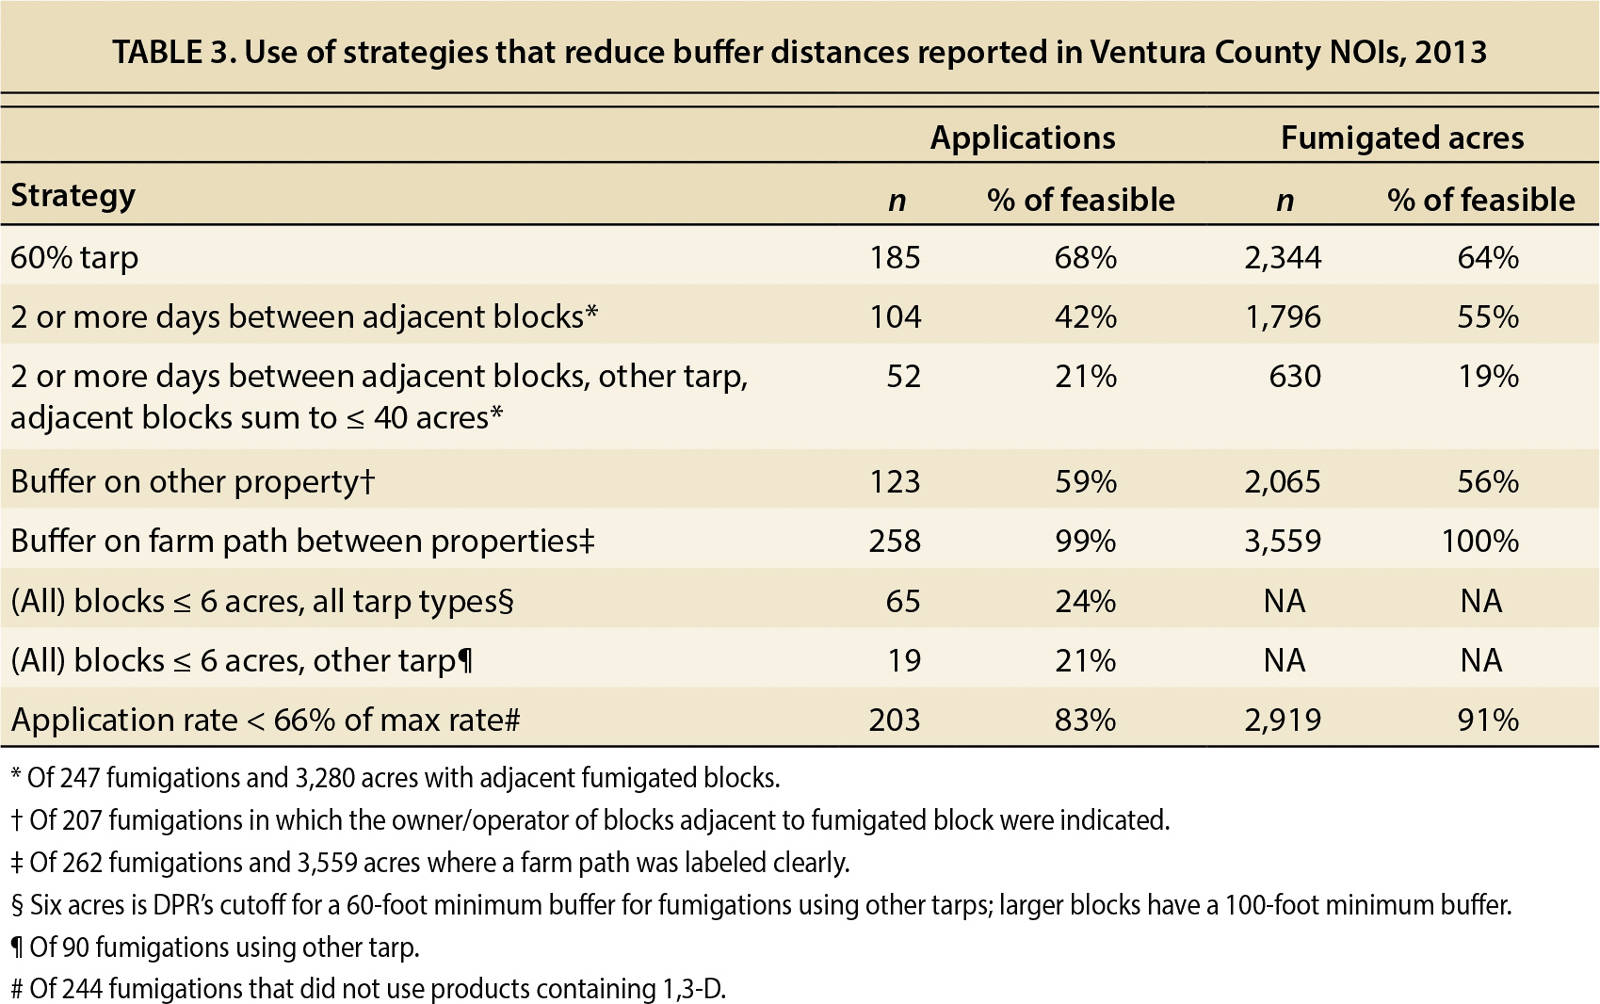 Use of strategies that reduce buffer distances reported in Ventura County NOIs, 2013